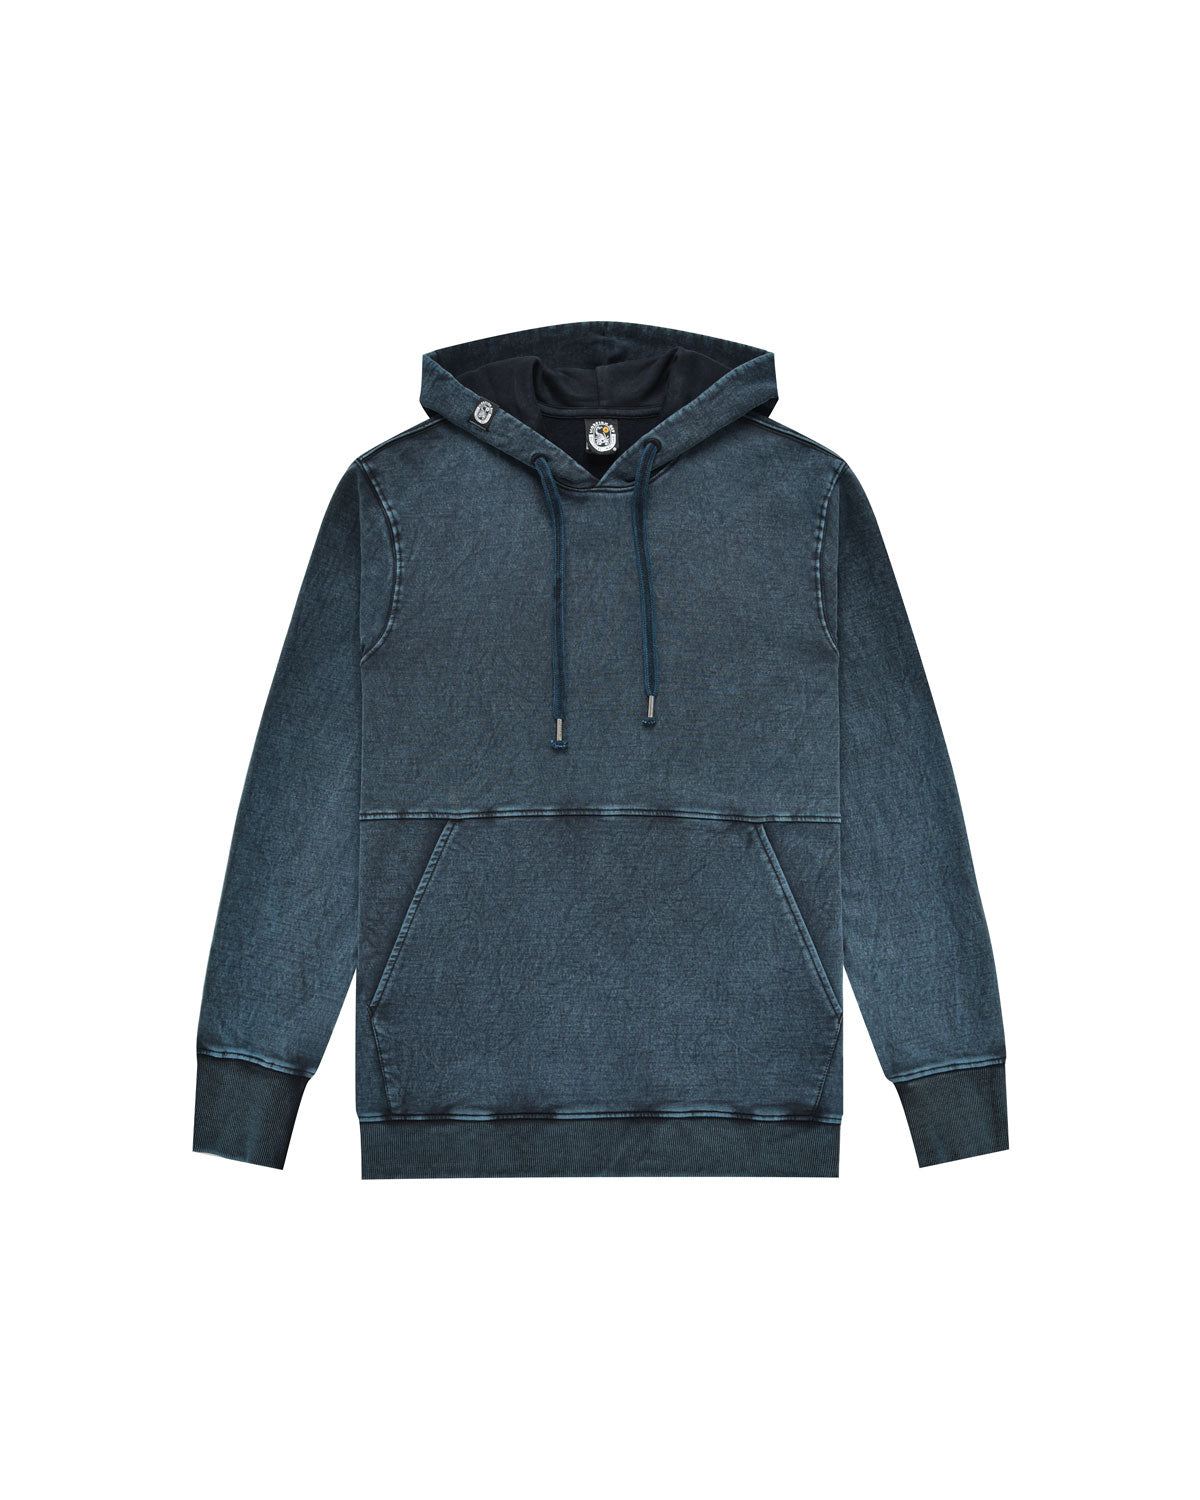 Man | Washed Petrol Color Sweatshirt With Hood And “Dept De Surfismo” Print